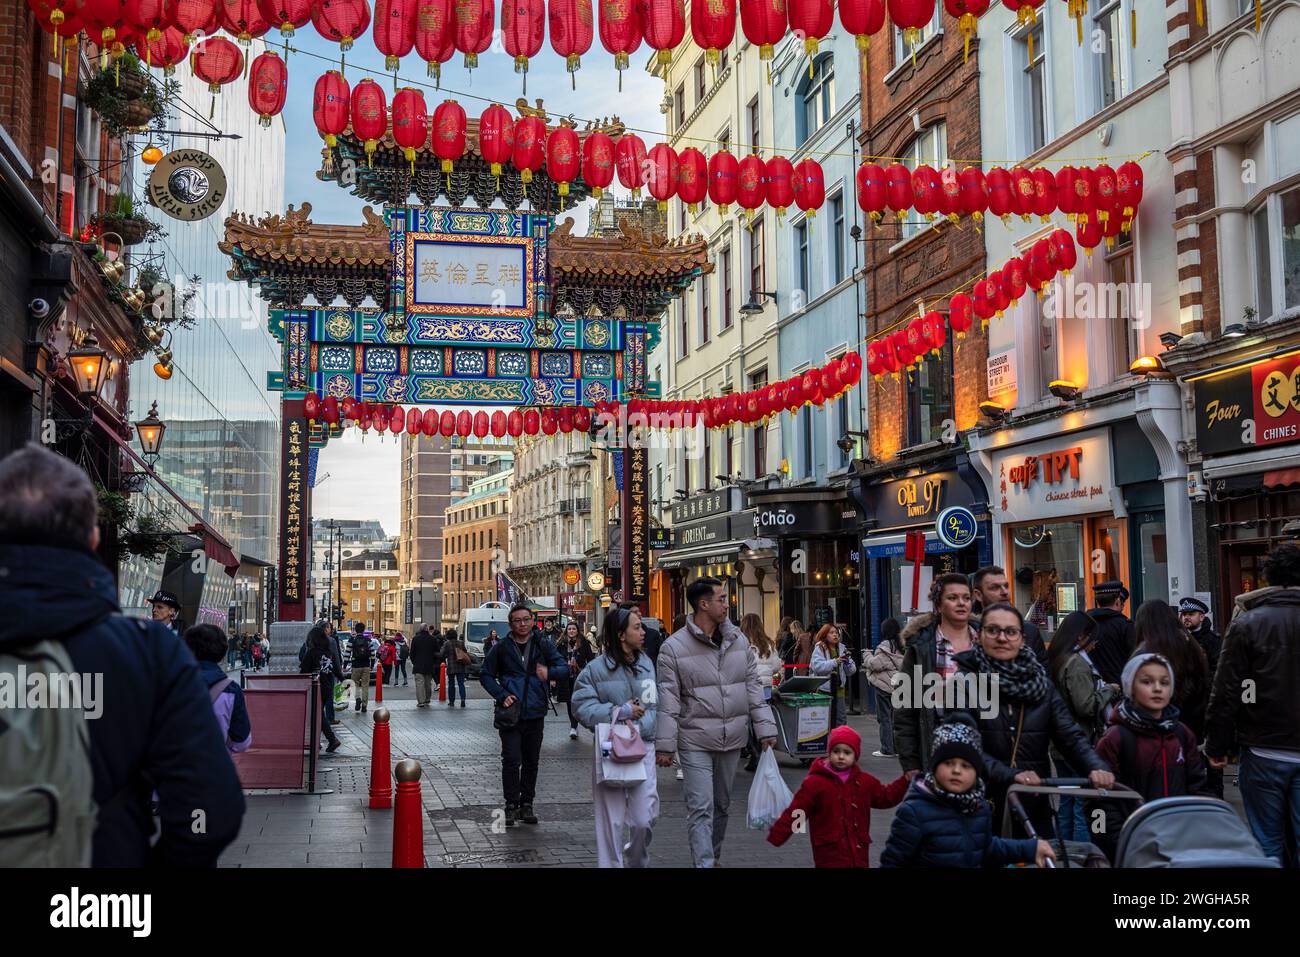 Chinatown decorated with traditional red lanterns, London, England, UK Stock Photo